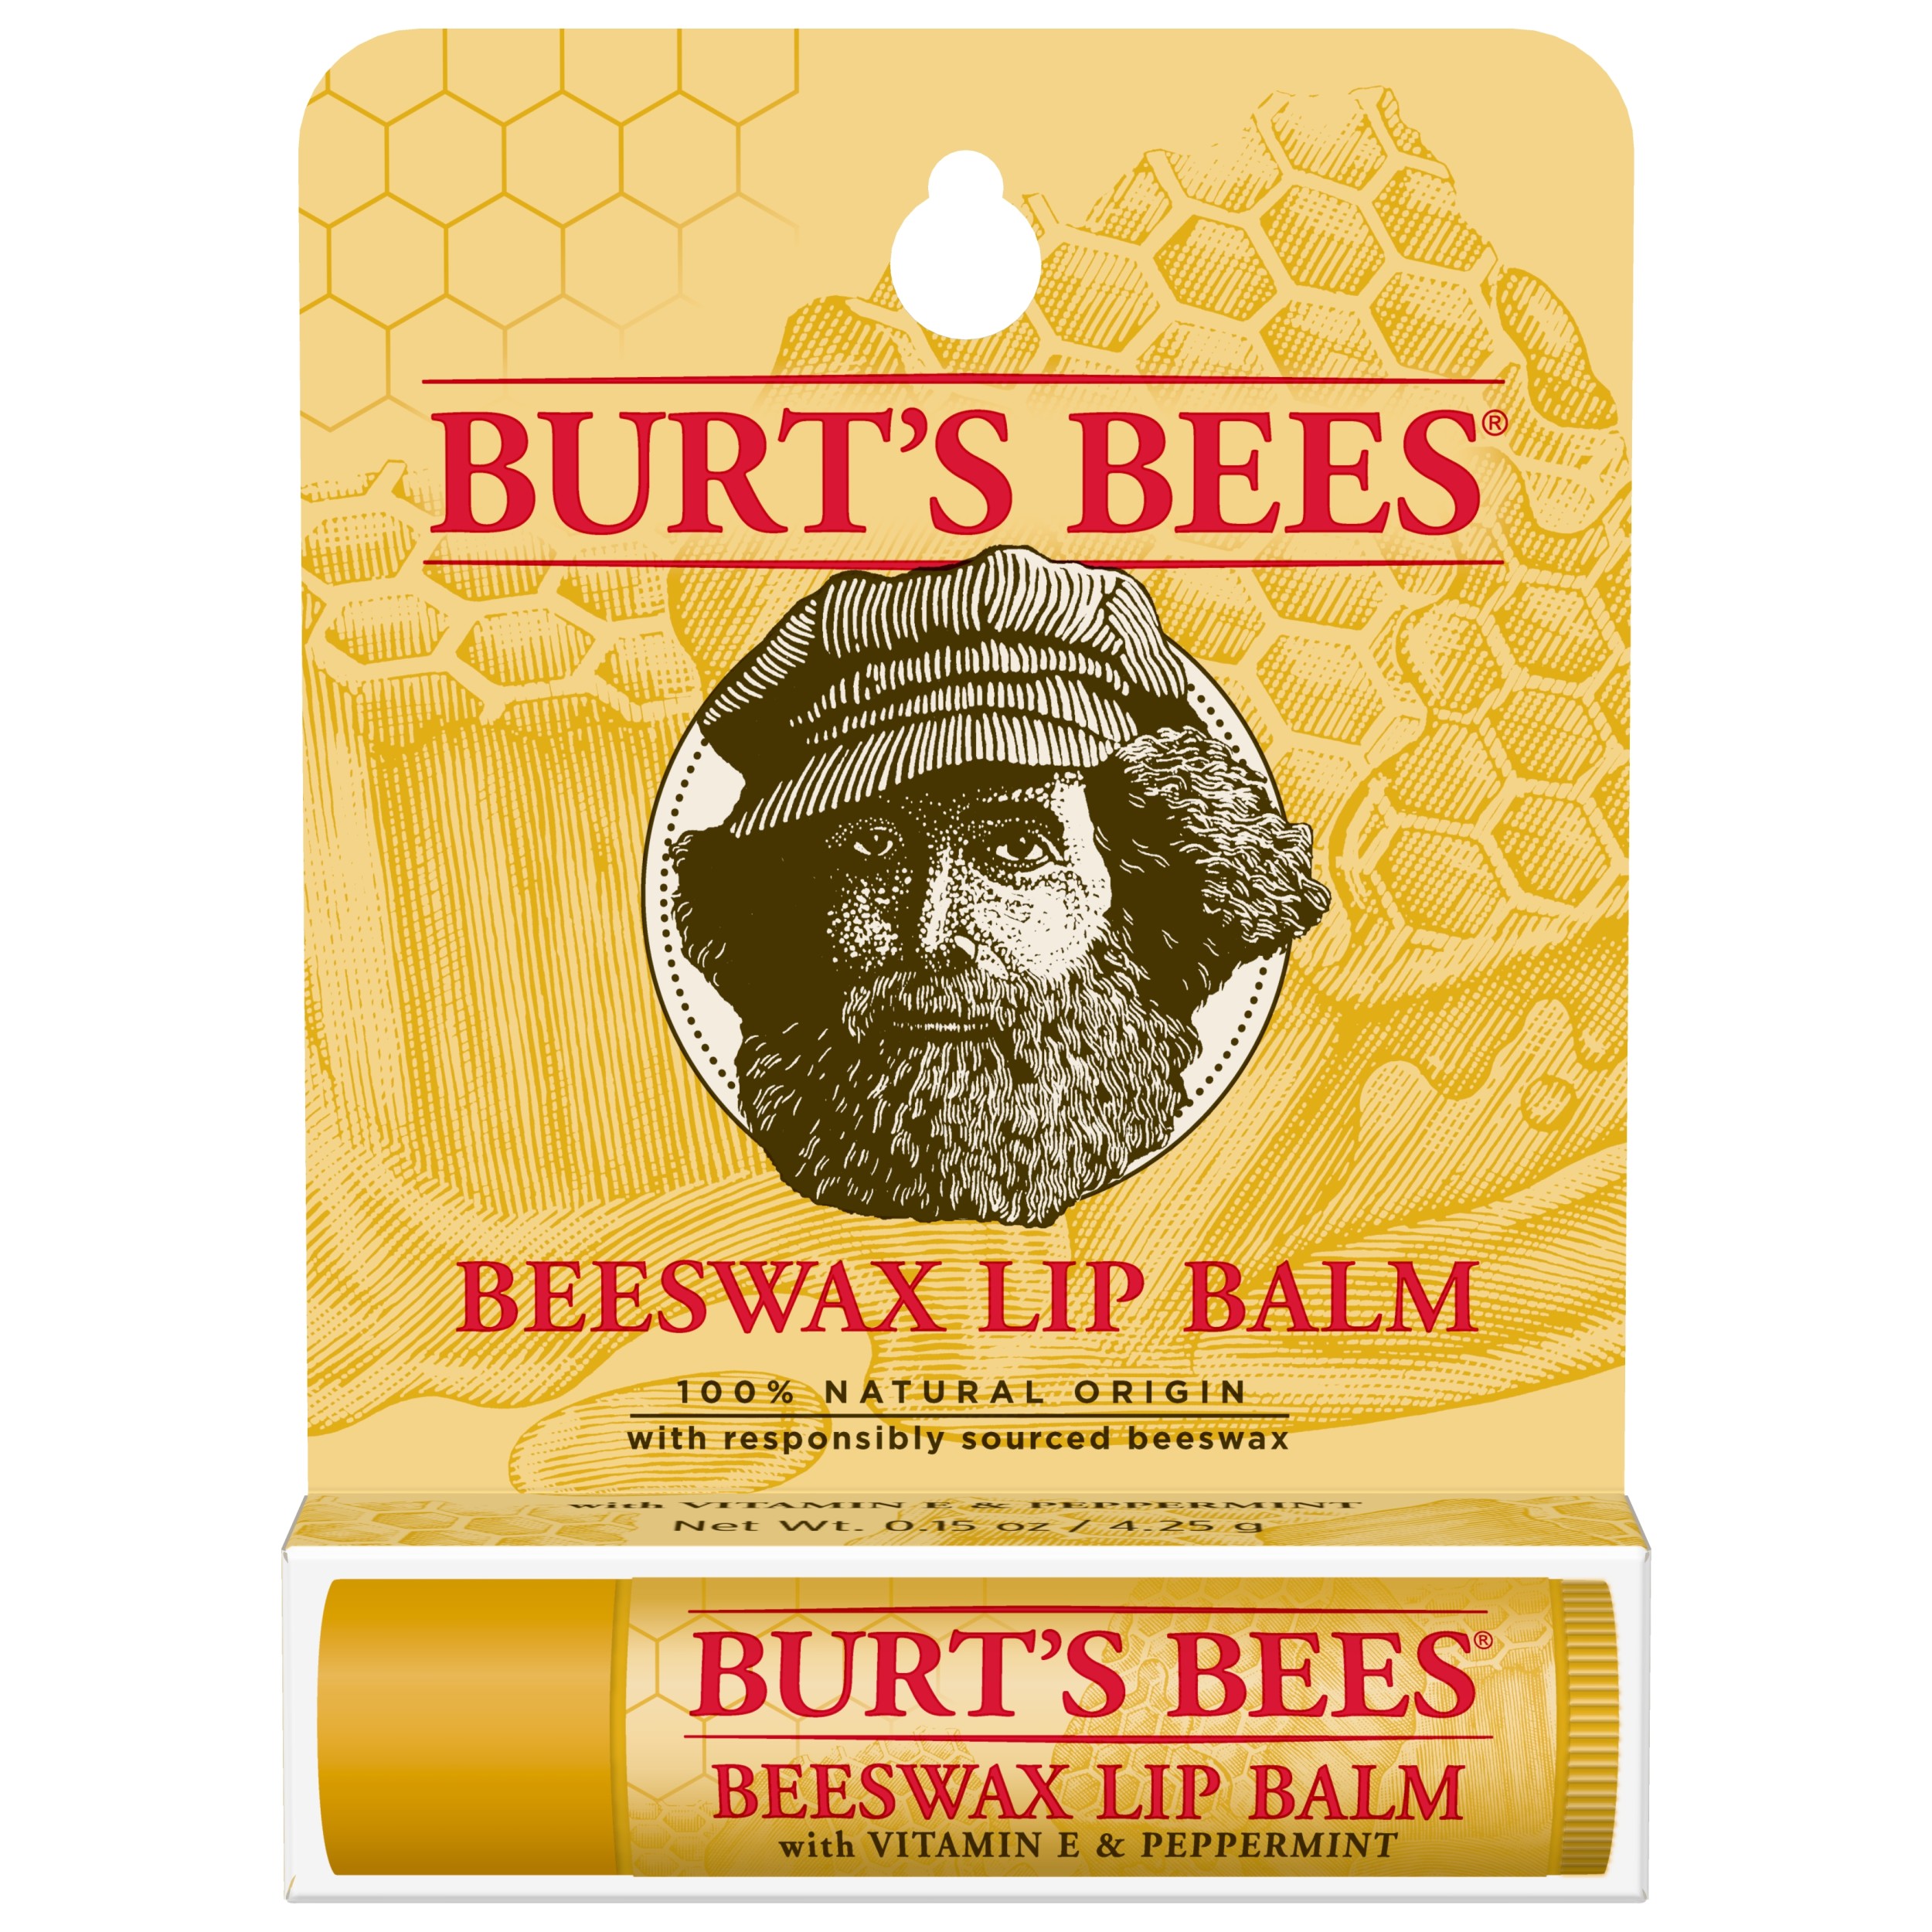 Burt's Bees 100% Natural  Moisturizing Lip Balm, with Beeswax, Vitamin E & Peppermint Oil, 1 Tube - image 1 of 12